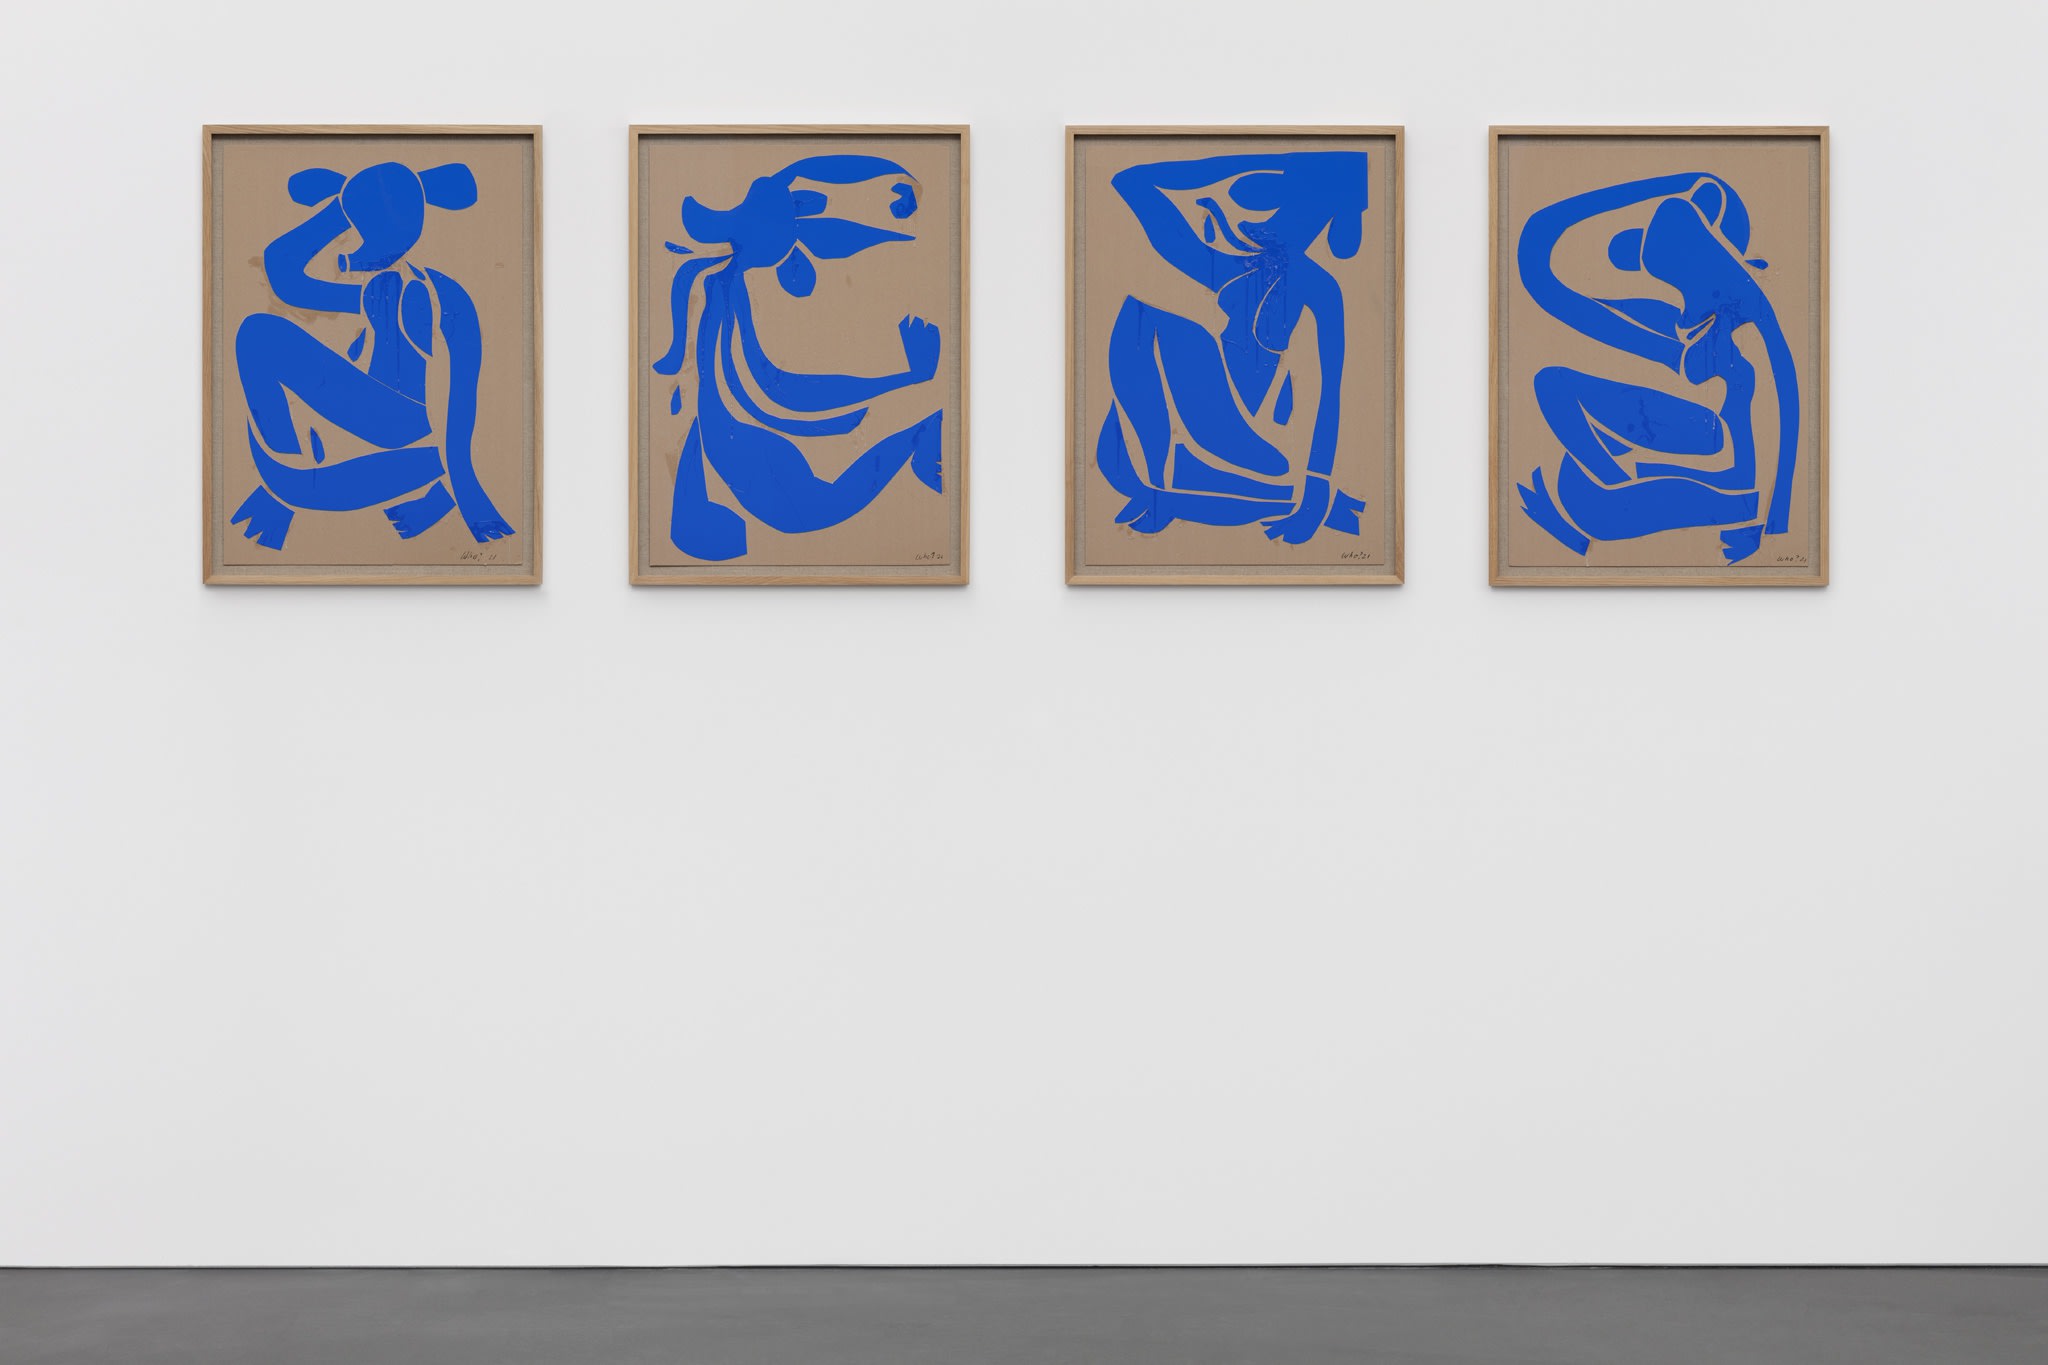 From left to right: Who’s Nude? I (SF 229), Who’s Nude? II (SF 260), Who’s Nude? III (SF 261), Who’s Nude? IV (SF 262), all works: 2021, cardboard, colored paper and glue on canvas, 76,5 x 56,6 x 3,5 cm (30 1/8 x 22 1/4 x 1 3/8 in) each (framed). Exhibition view: Simon Fujiwara, Once Upon a Who?, Esther Schipper, Berlin (2022). Photo © Andrea Rossetti